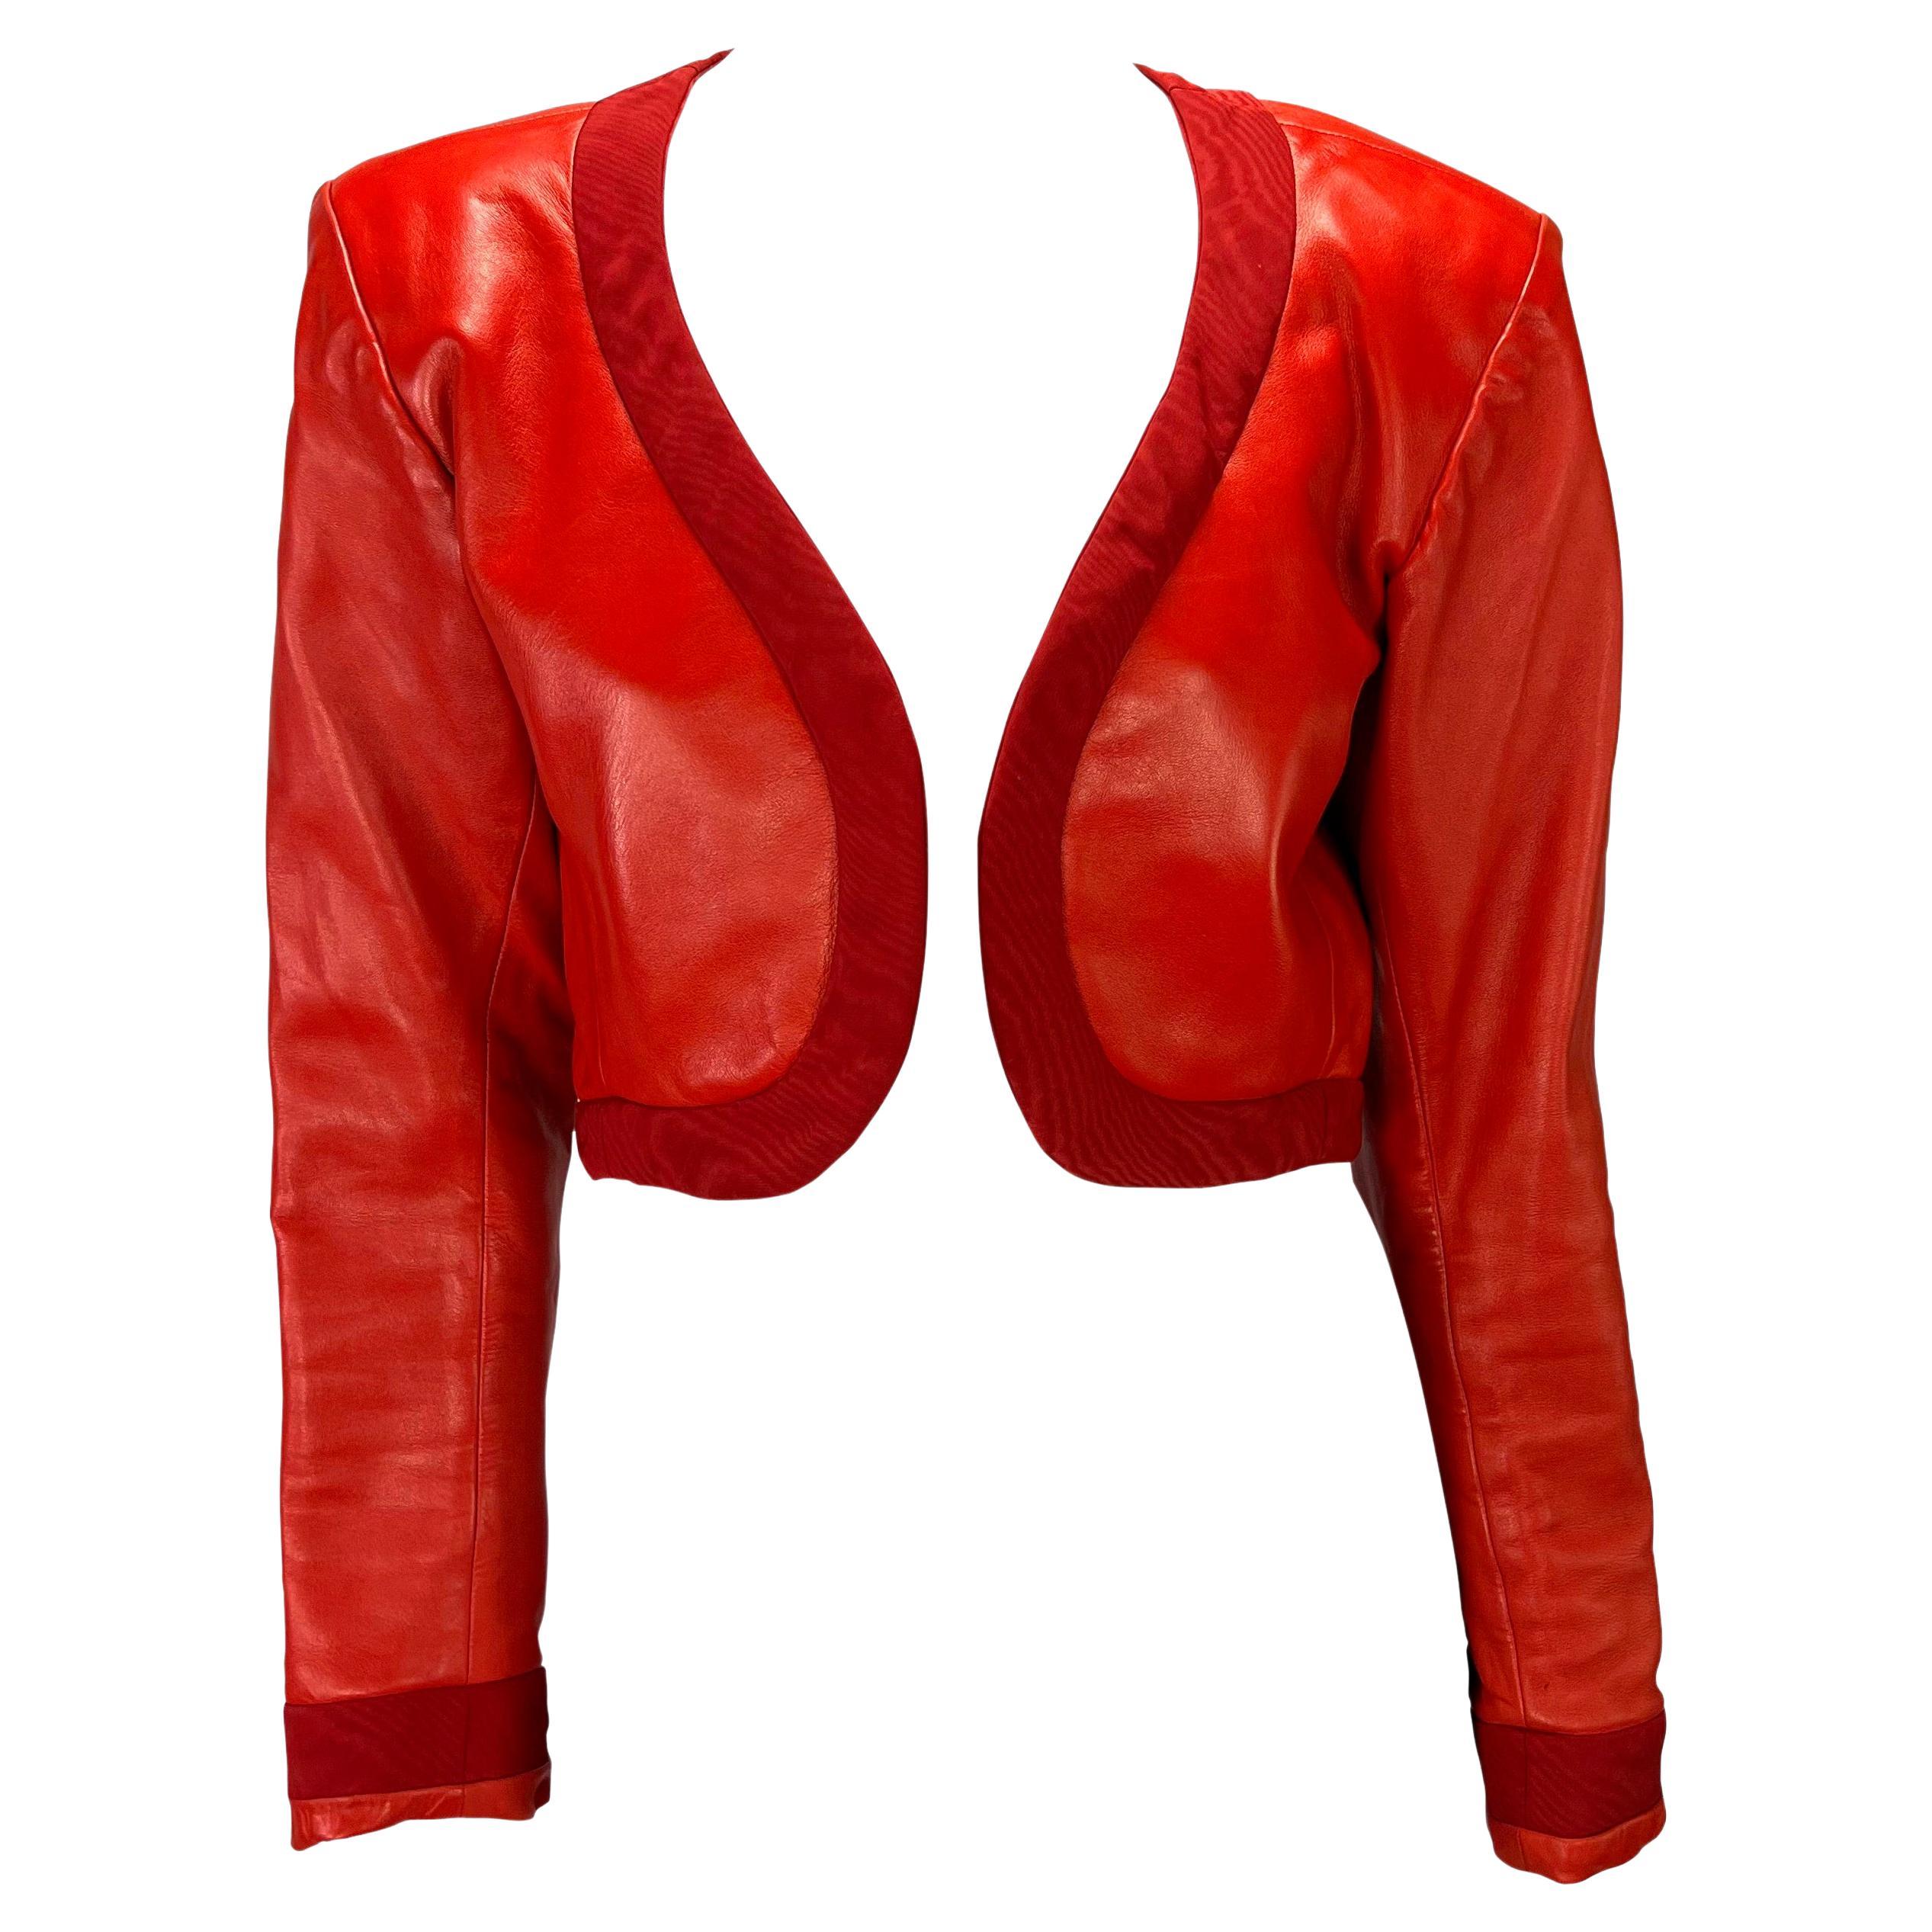 S/S 1990 Yves Saint Laurent Rive Gauche Red Leather Cropped Bolero Jacket For Sale